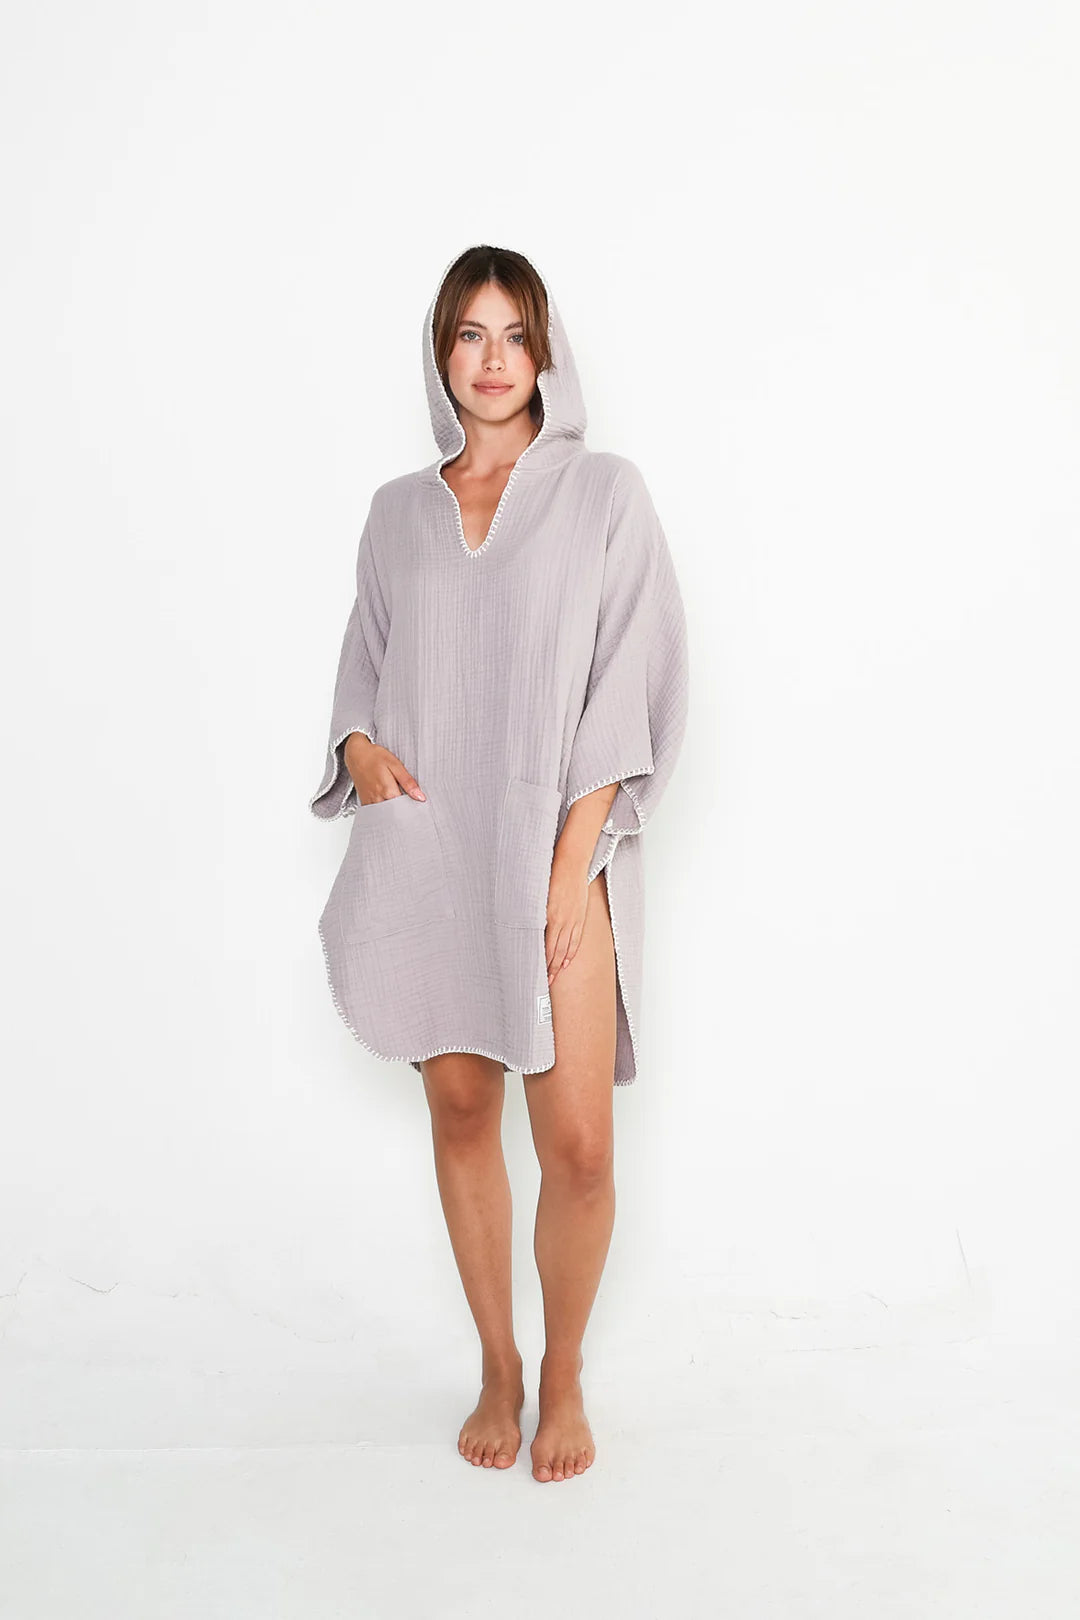 The Cocoon Surf Poncho in Lilac